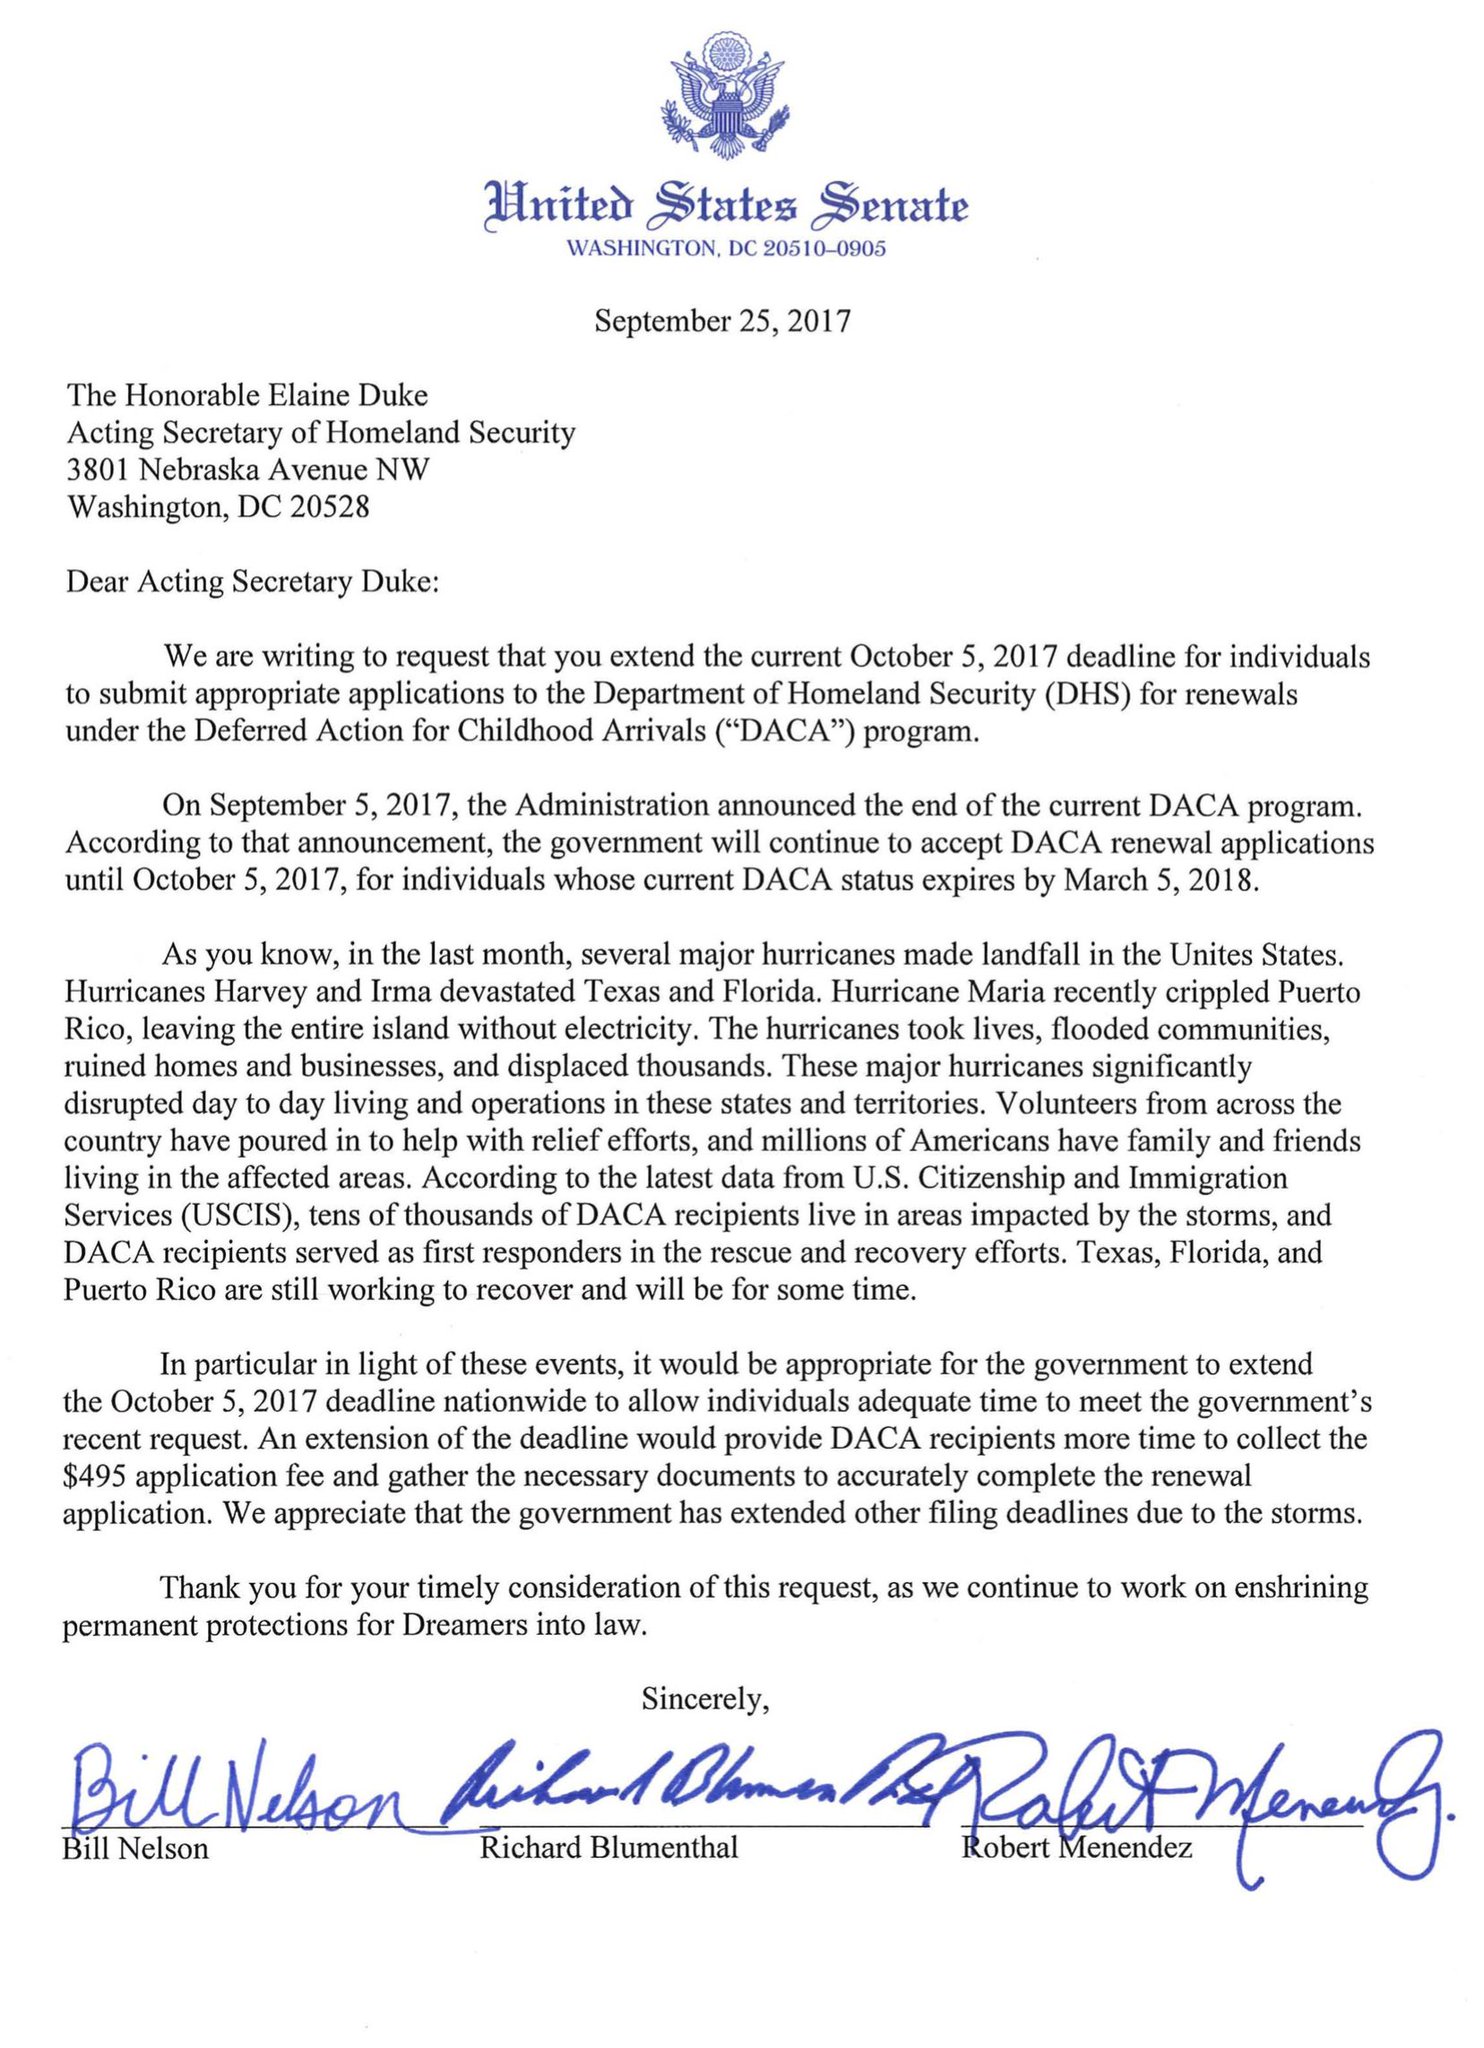 Senator Dick Durbin on Twitter: "I joined @BillNelson in requesting an extension of the October 5 DACA deadline. Urge @DHSGov to #Dreamers more time to their DACA https://t.co/nUkE1vurXo"